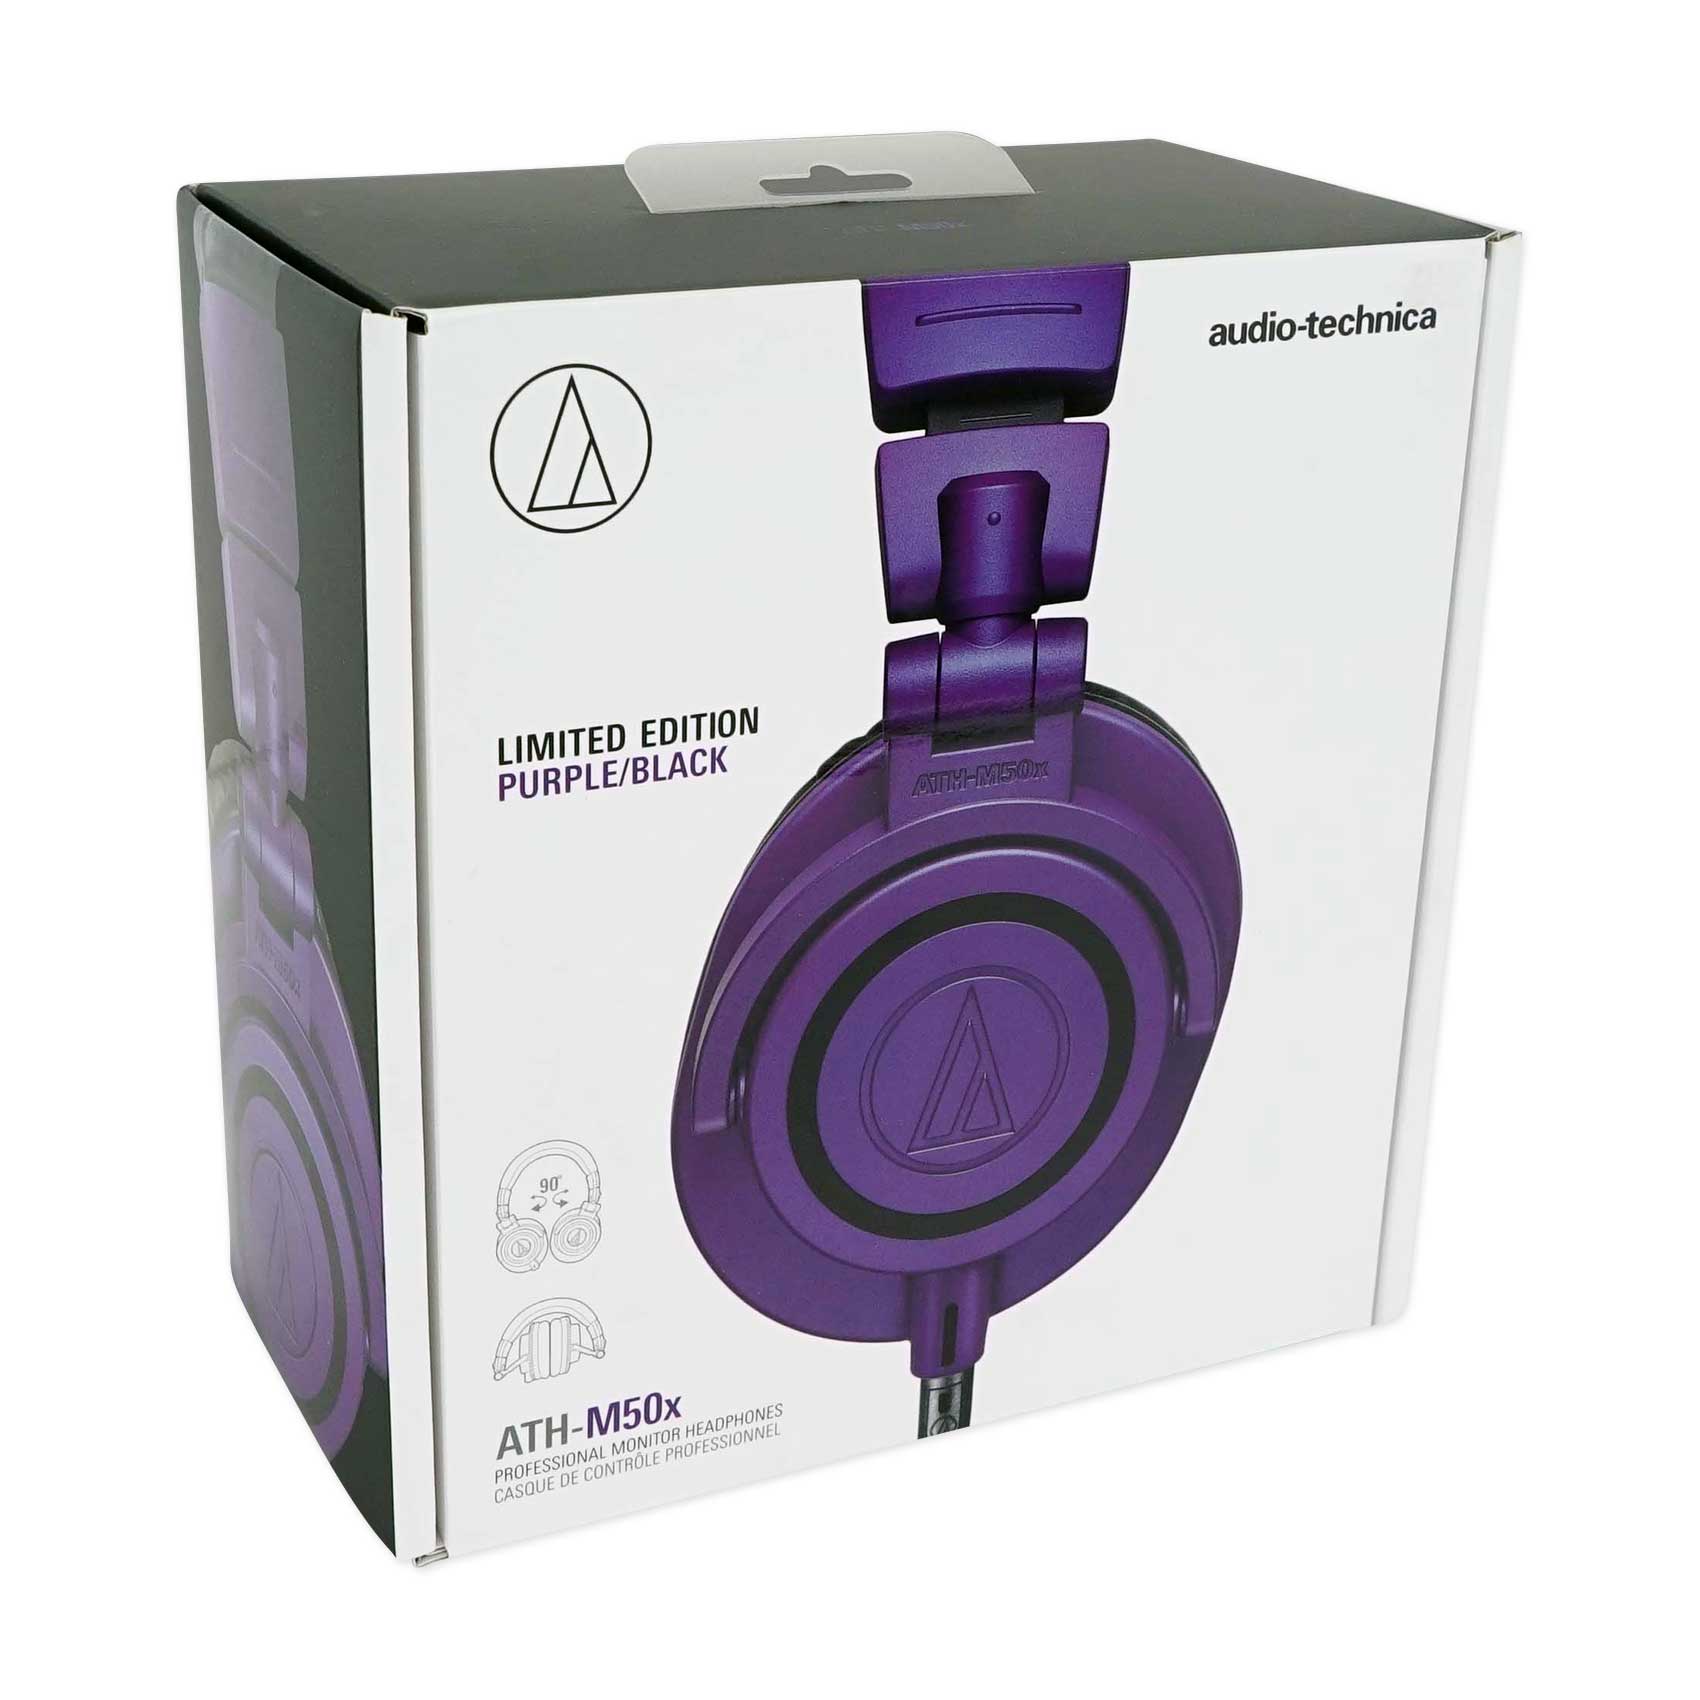 audio technica product serial number